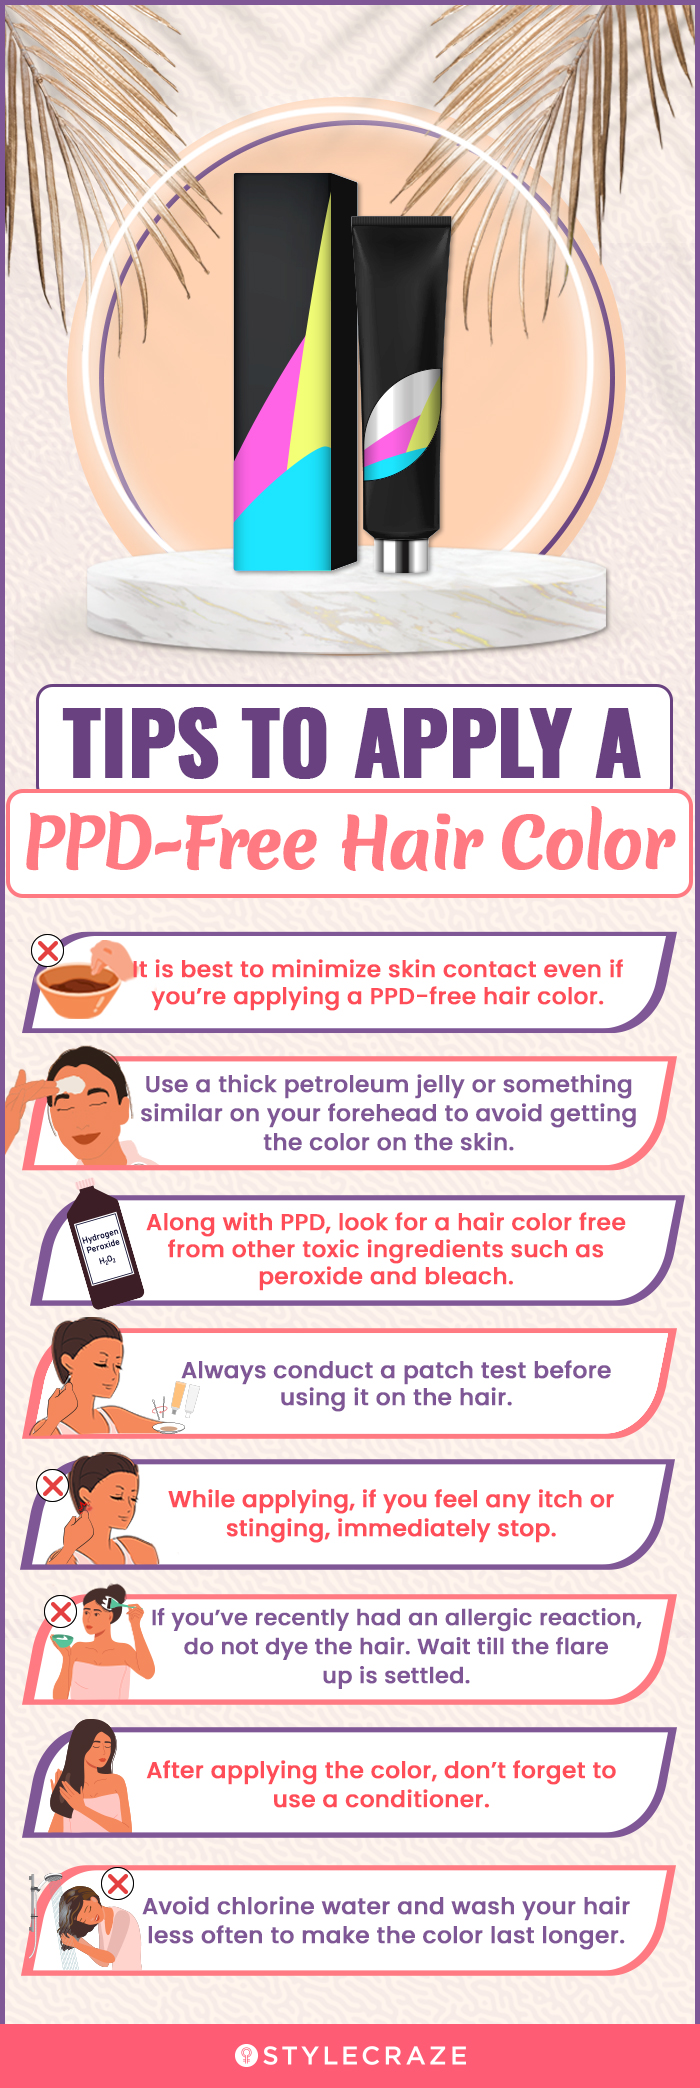 Tips To Apply A PPD-Free Hair Color (infographic)